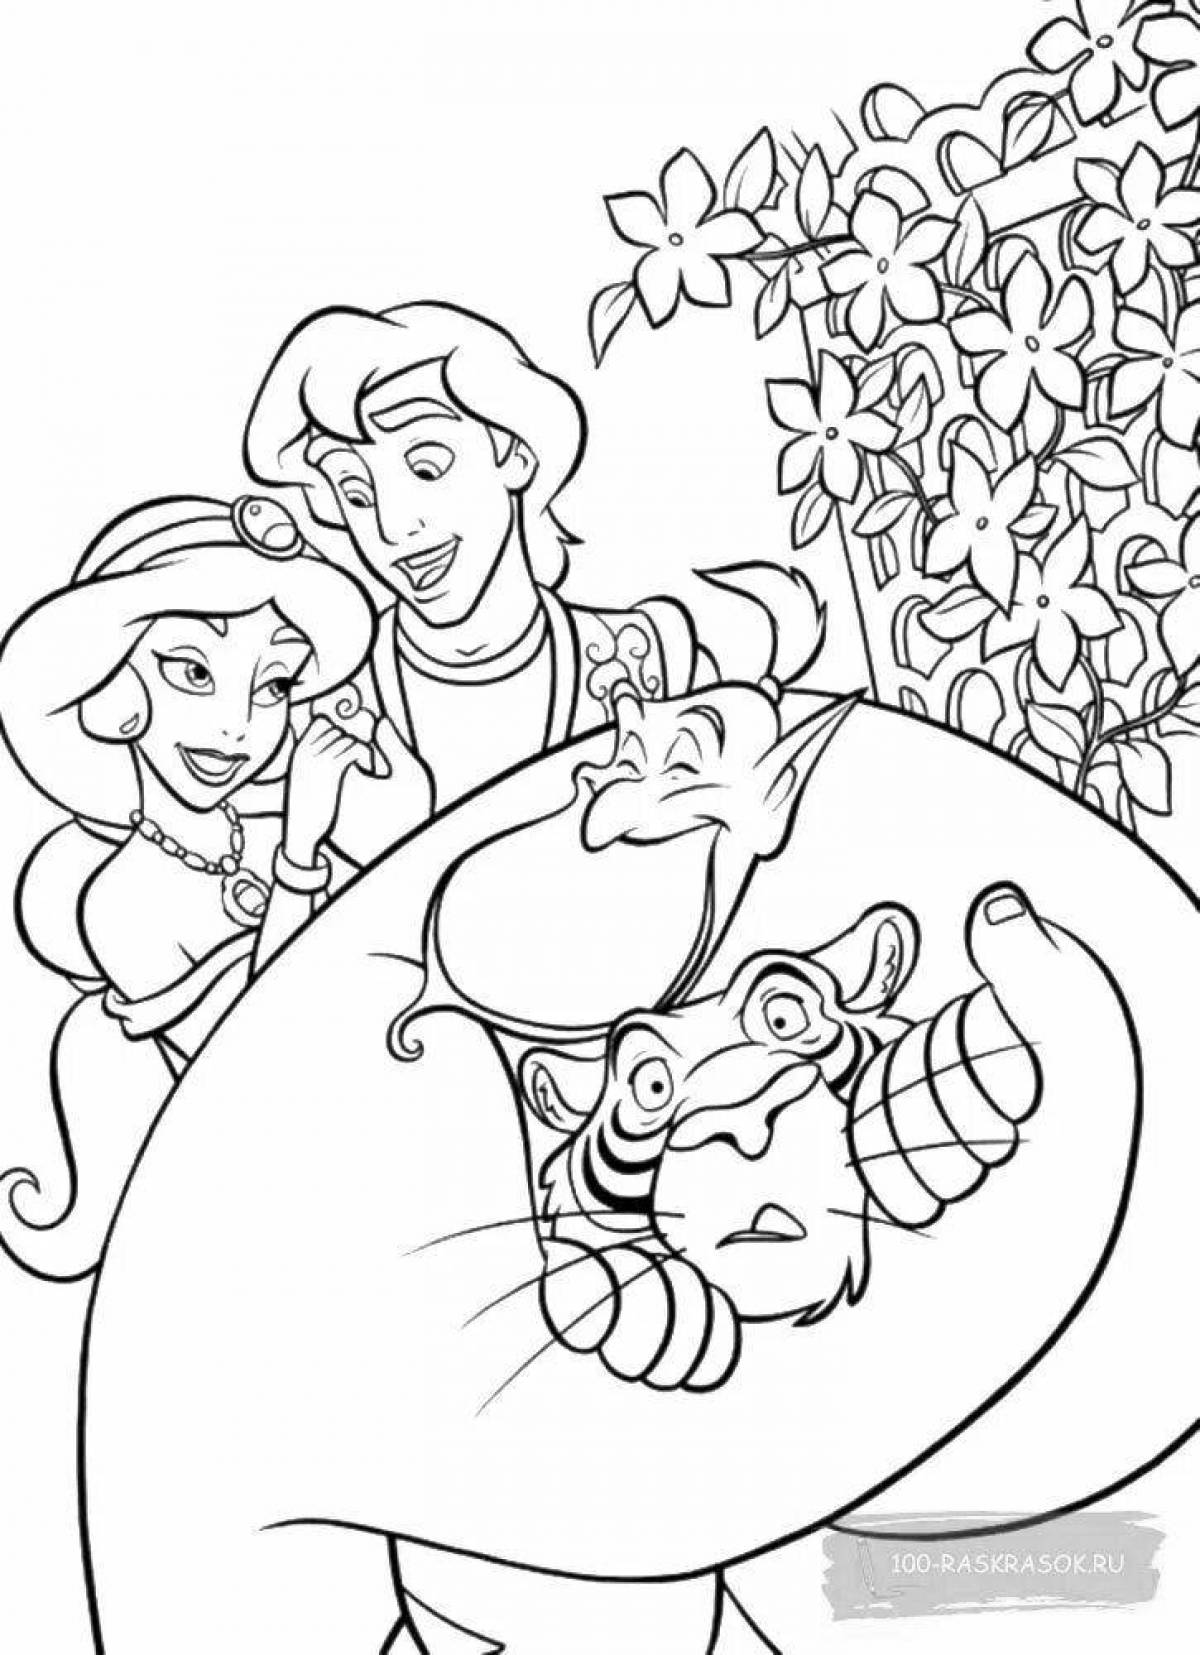 Charming aladin coloring book